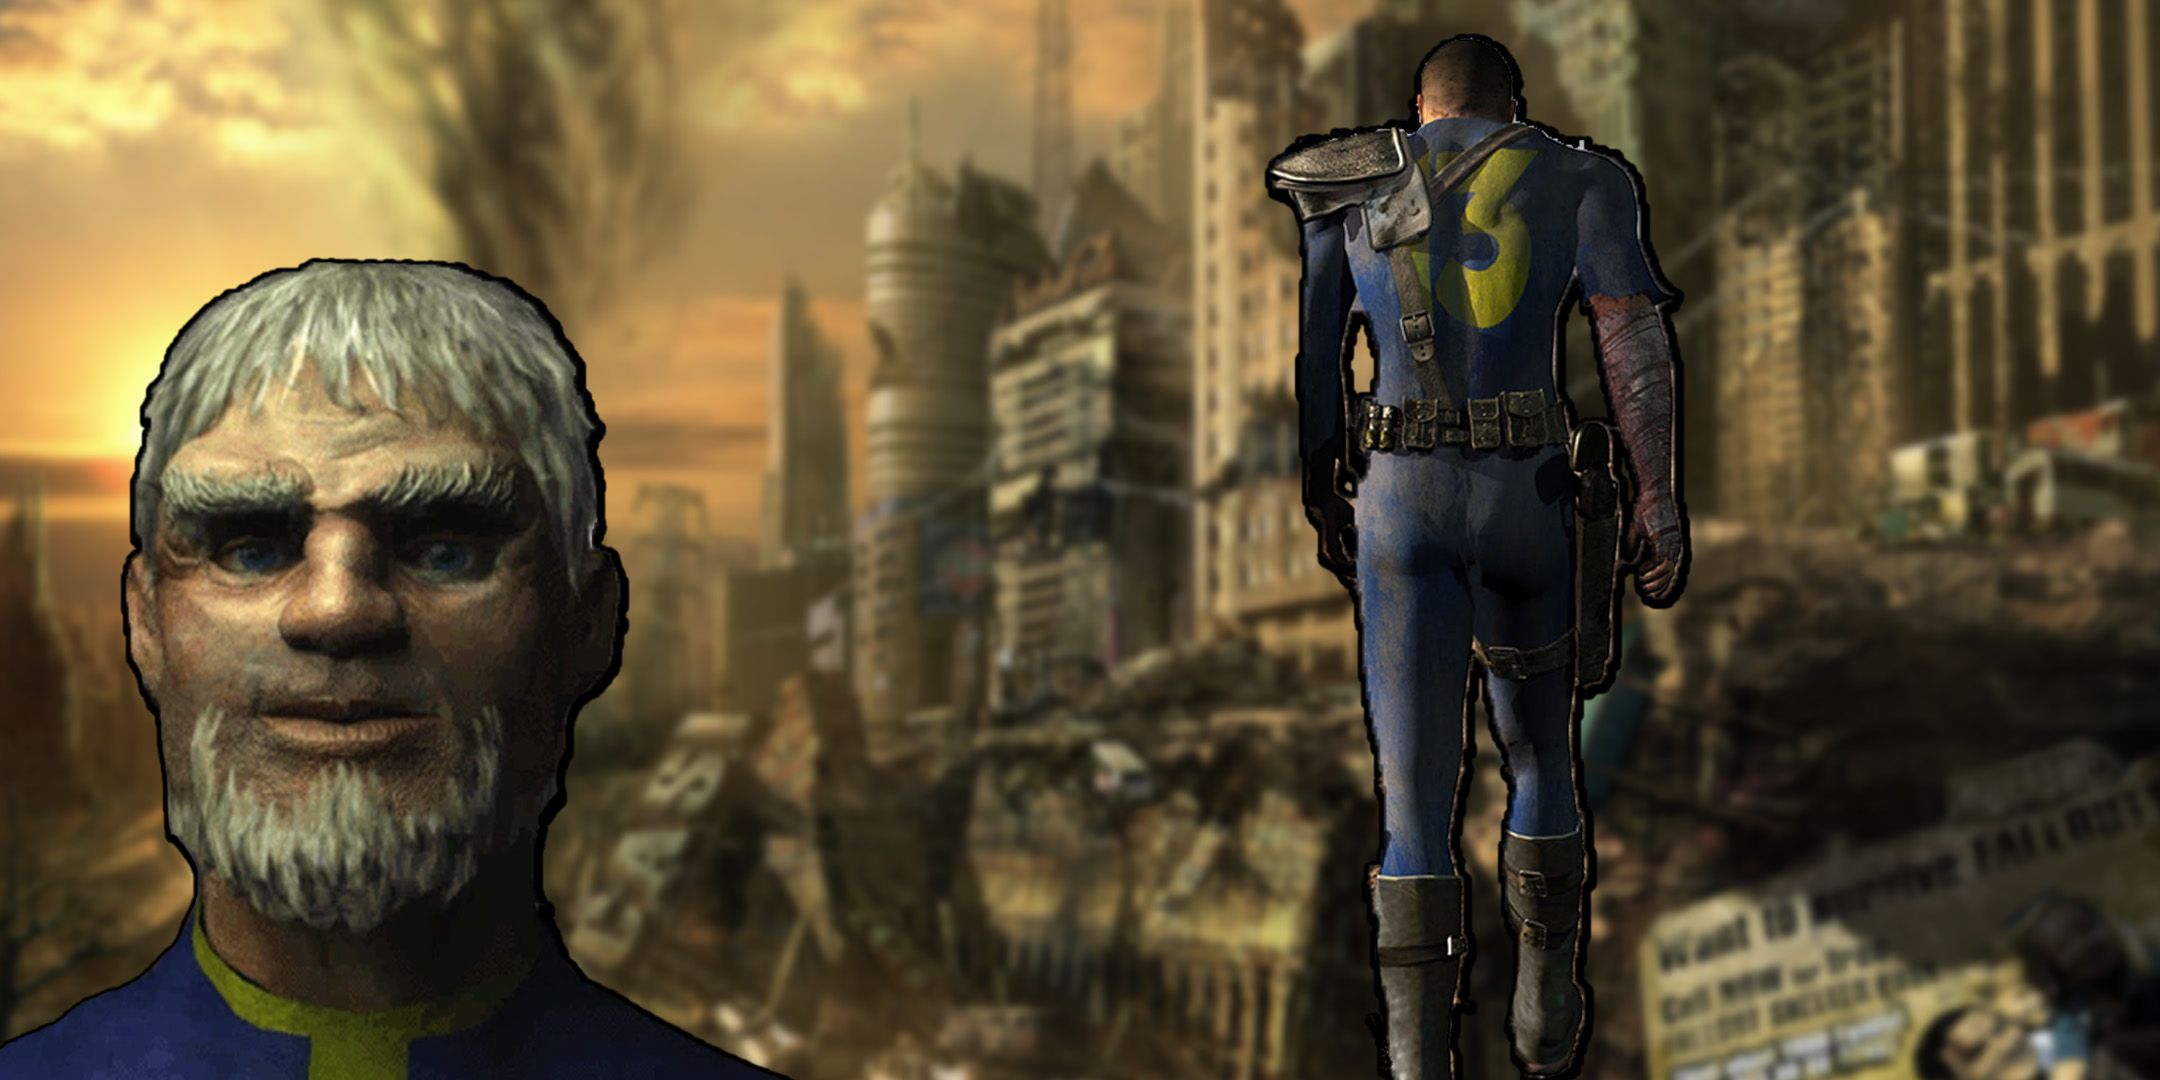 The Original Fallout Game Has the Most Depressing Ending